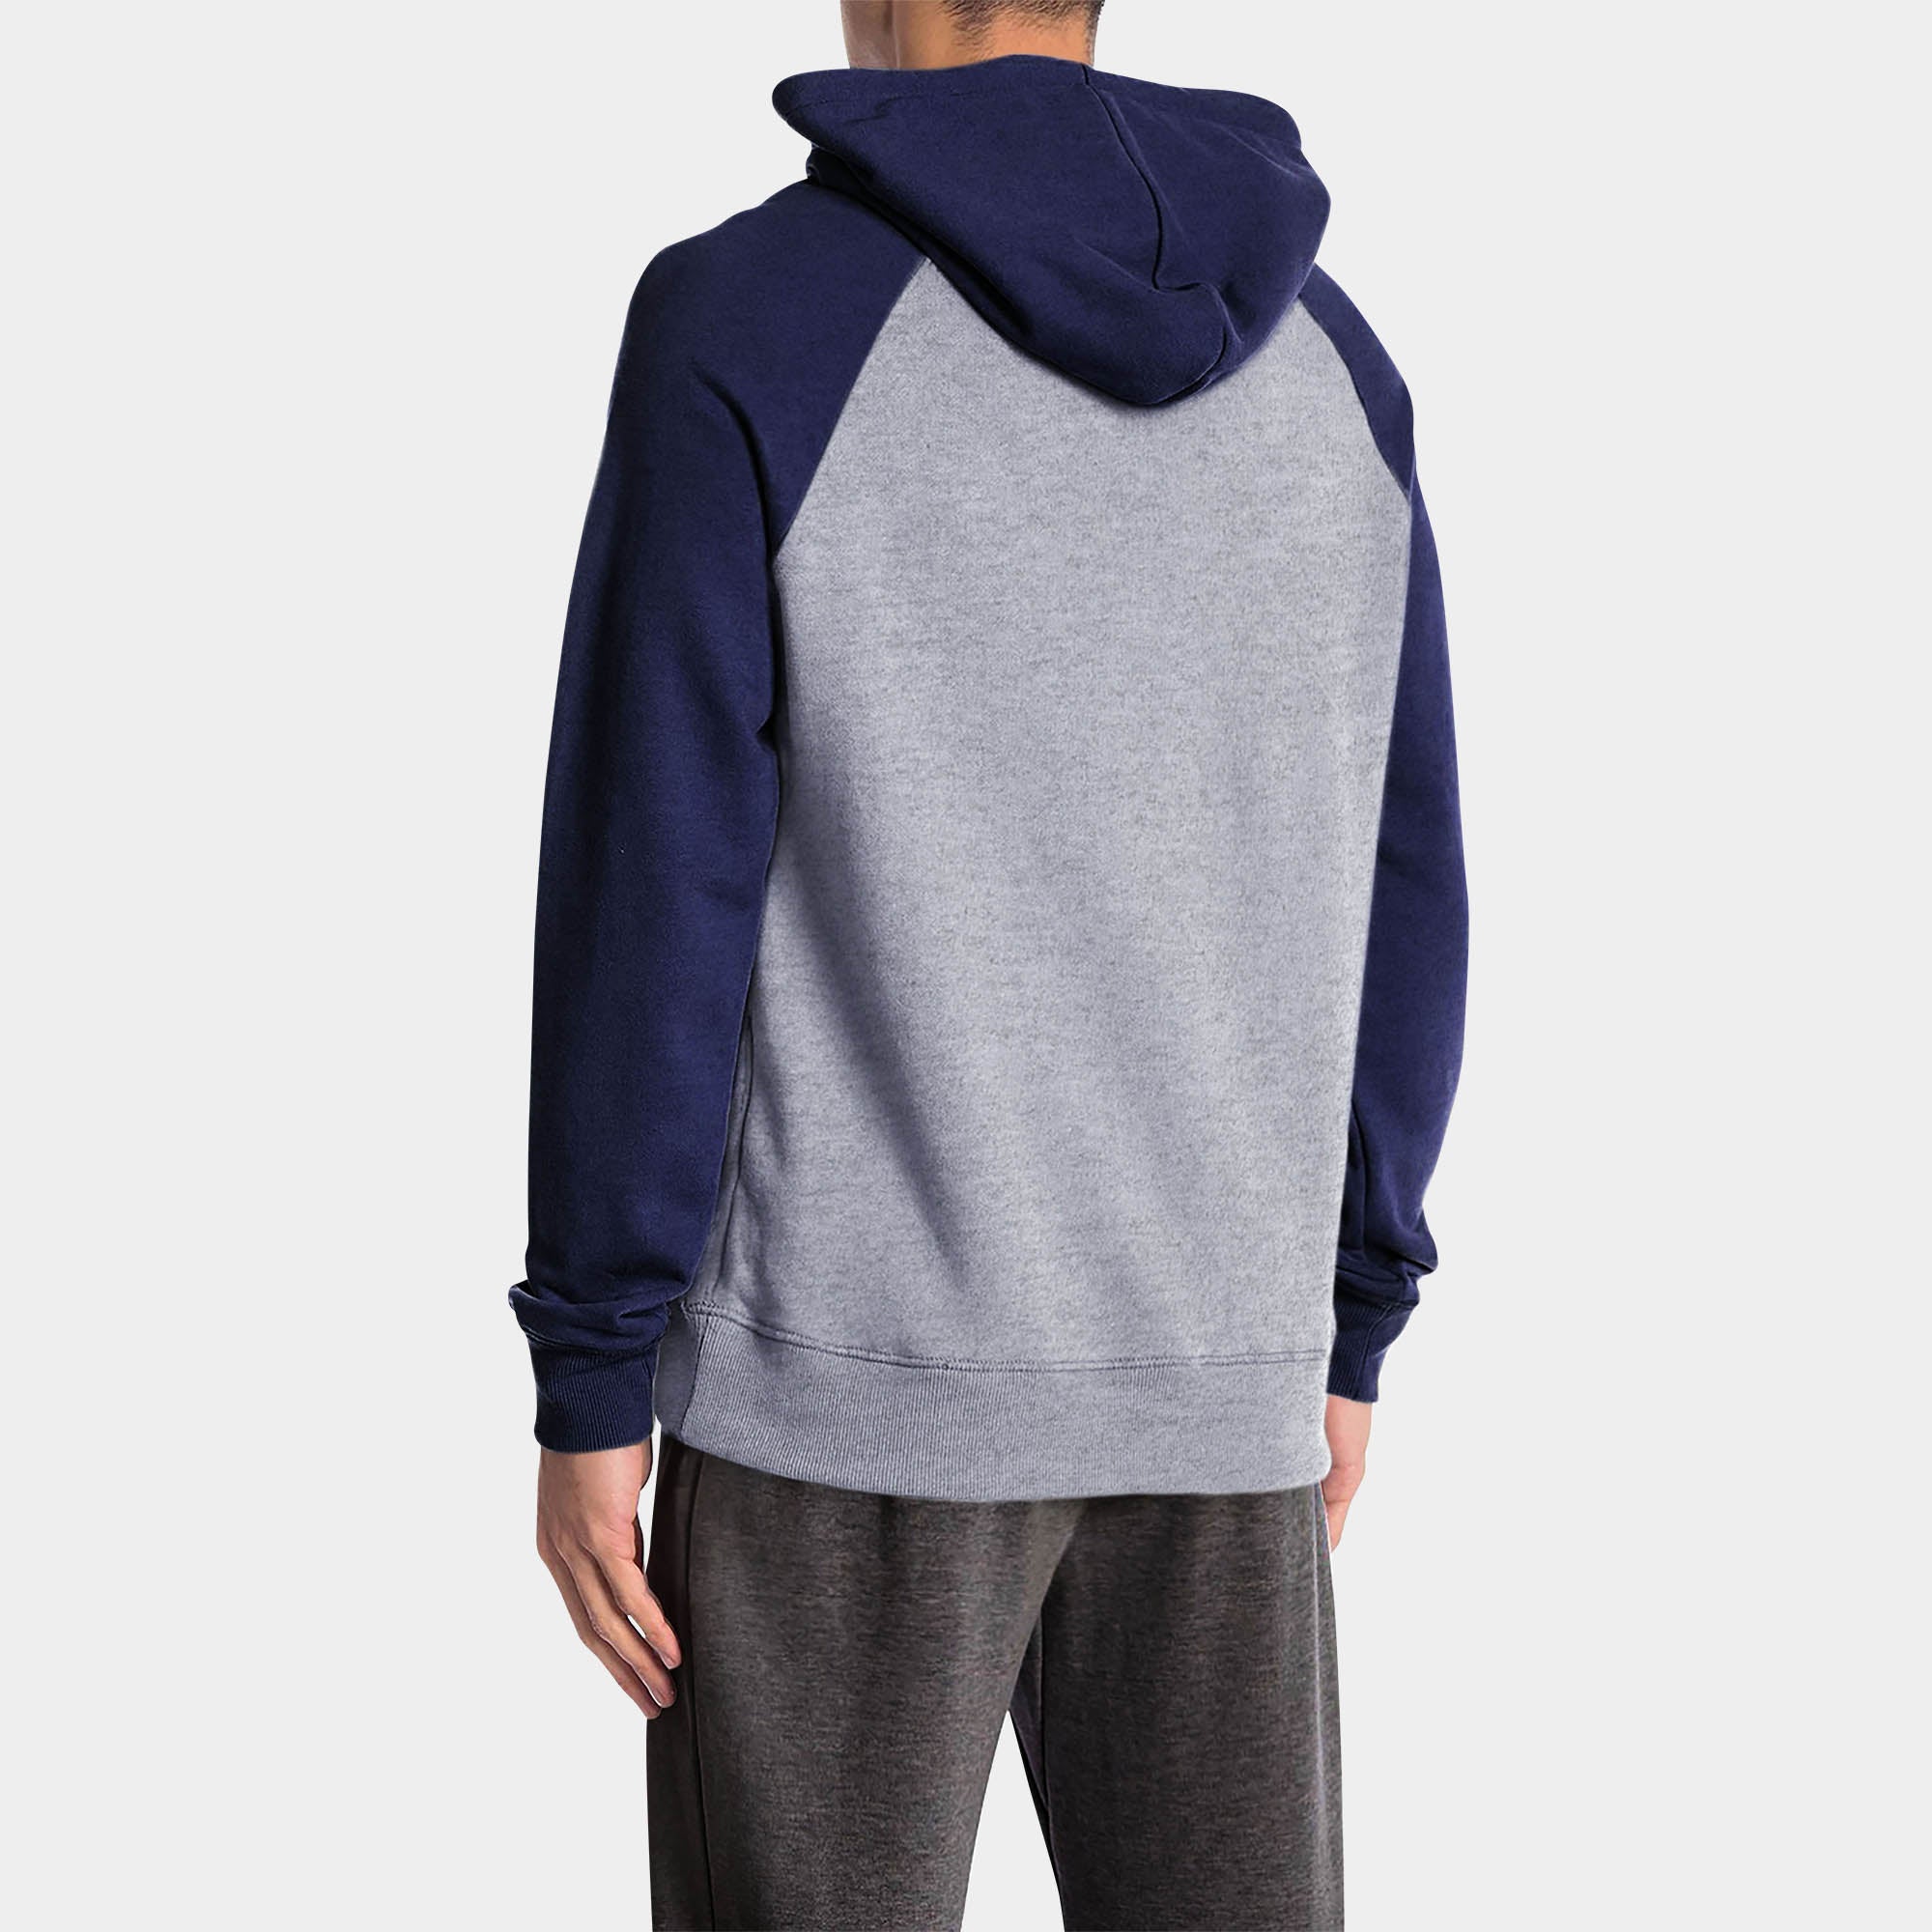 pullover hoodie_mens pullover hoodie_pullover sweatshirt_champion pullover hoodie_pullover adidas_hooded pullover_Heather Gray/Royal Caviar